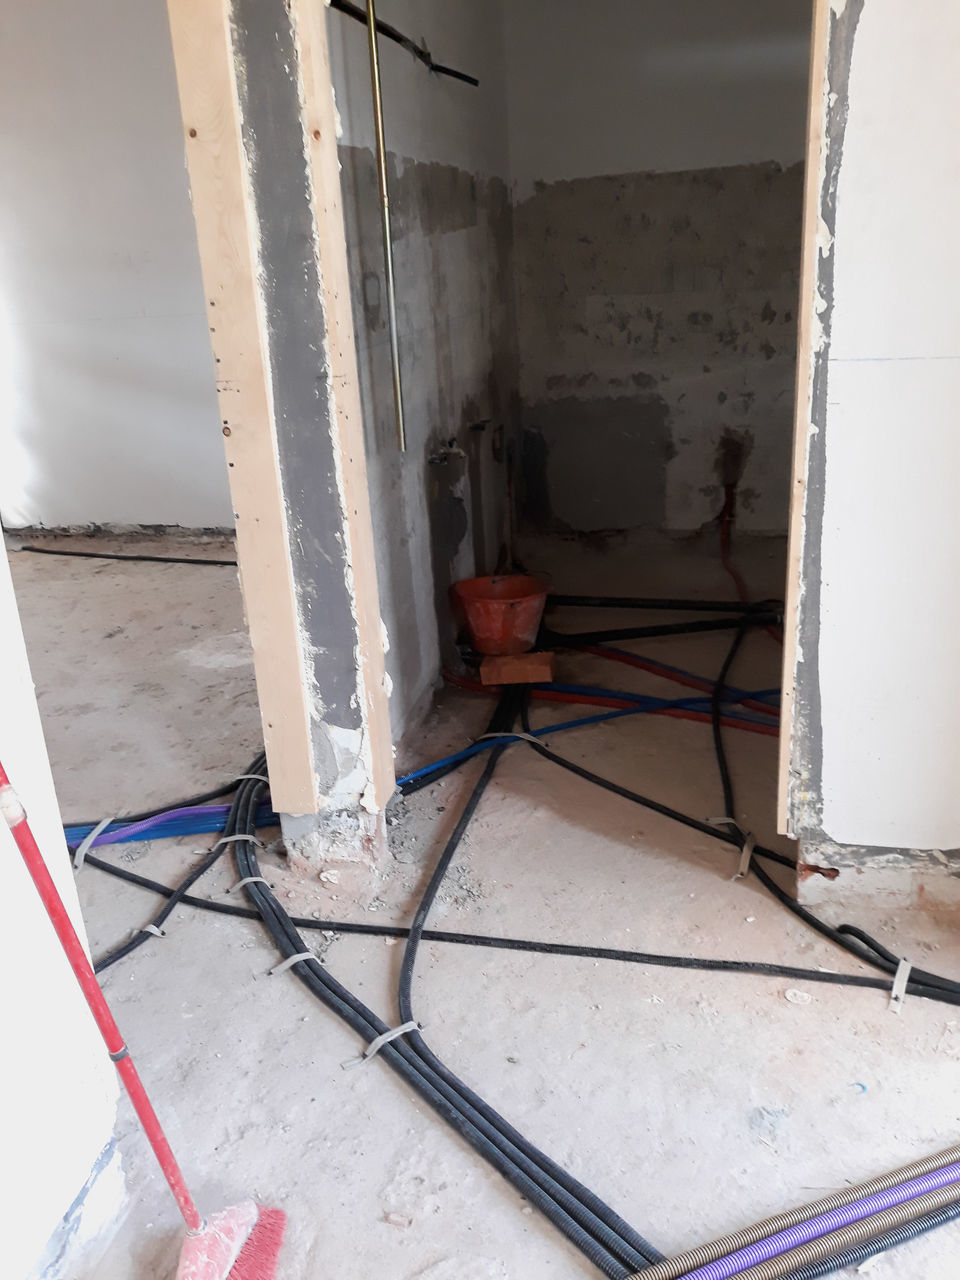 floor, room, indoors, wall, home improvement, improvement, architecture, home interior, no people, electrical wiring, diy, renovation, construction industry, house, construction site, flooring, industry, destruction, broken, damaged, wall - building feature, building, built structure